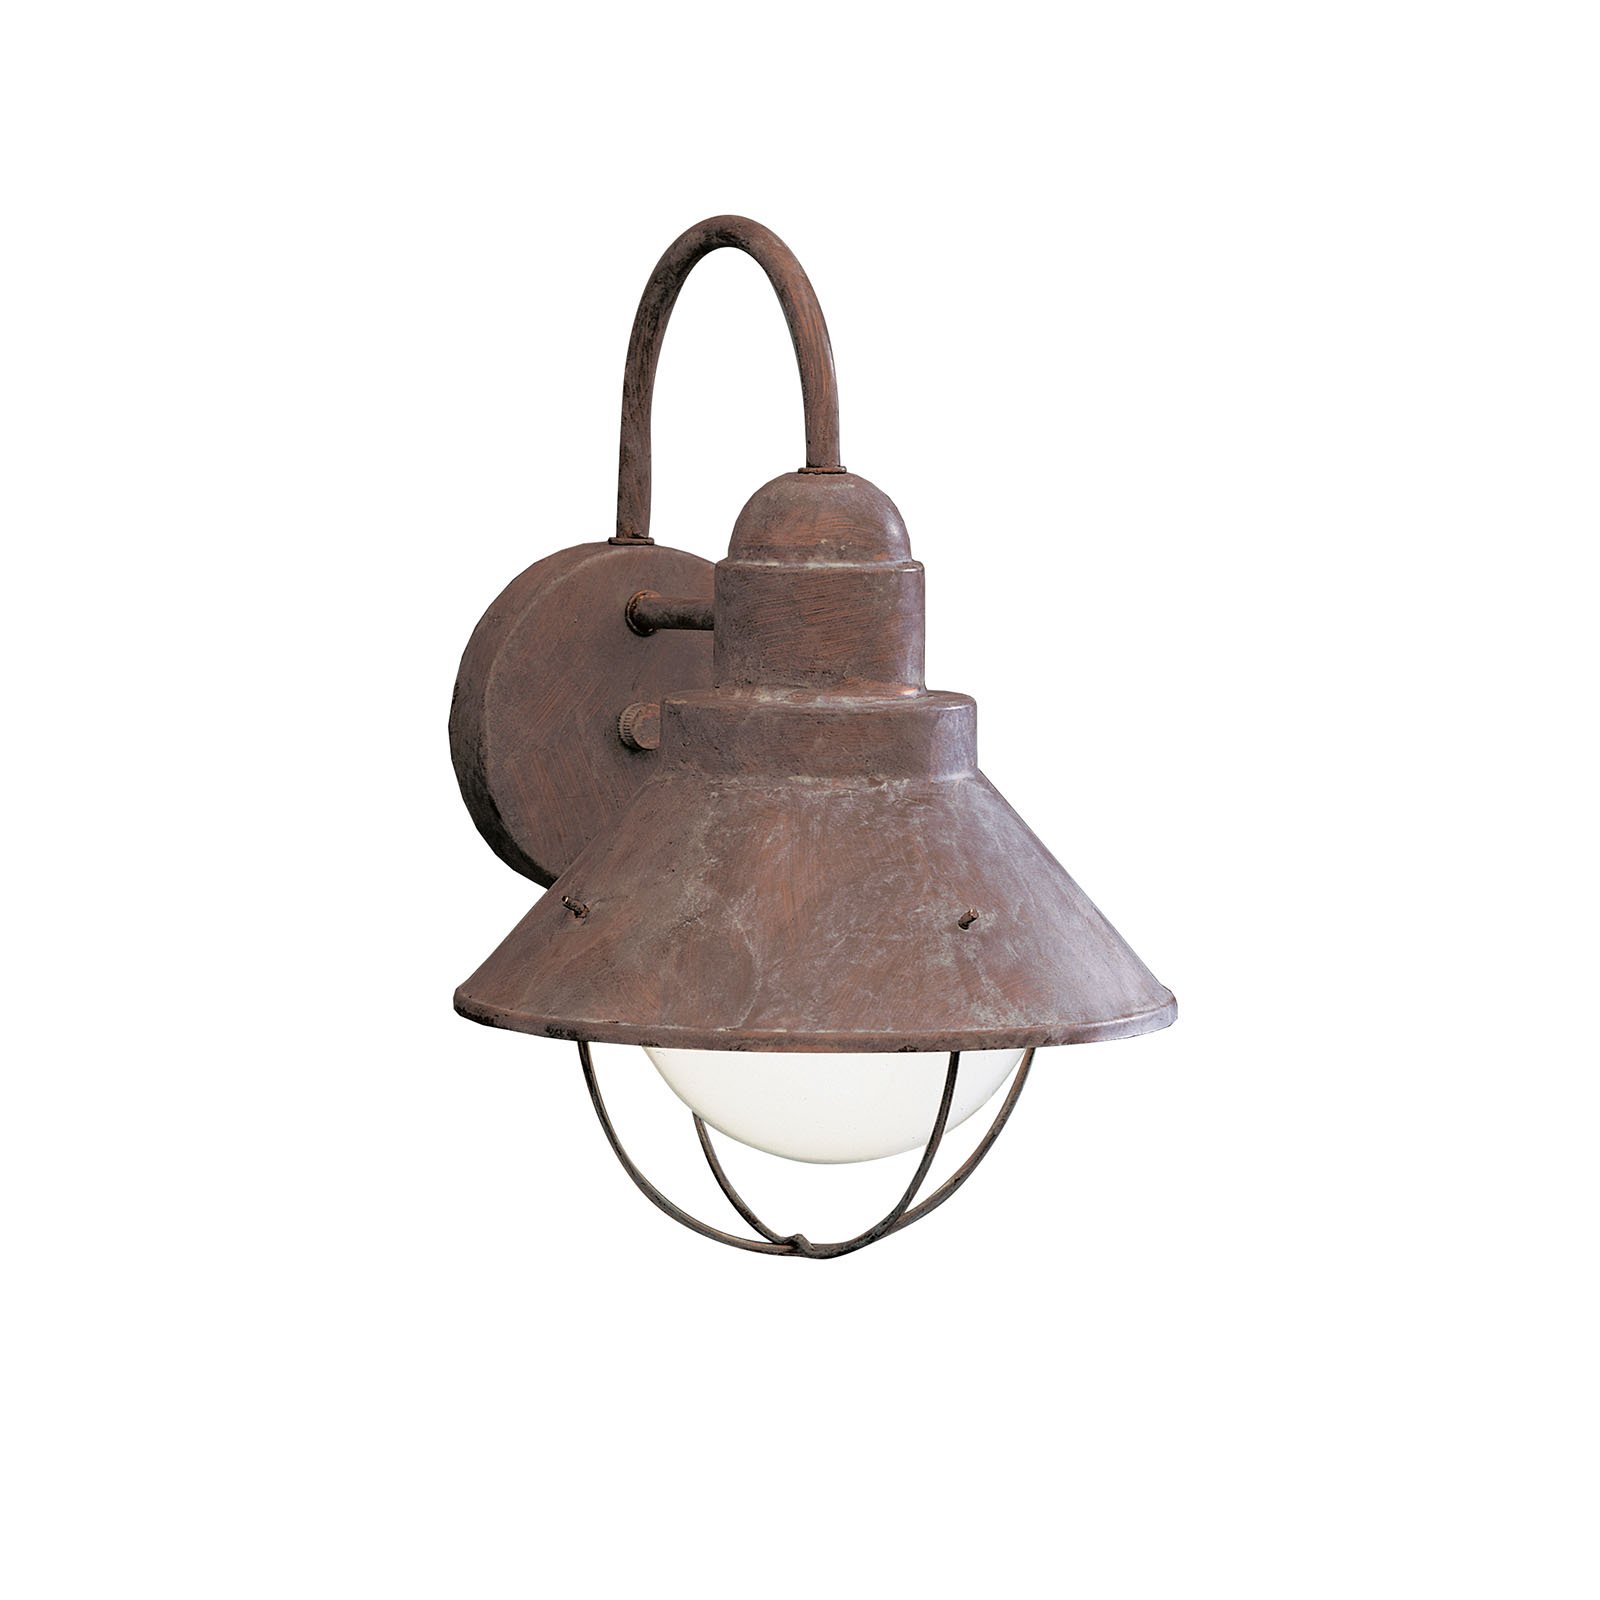 The Seaside(TM) 12in. 1 light outdoor wall light features a classic look with its Olde Brick and glass globe. The Seaside(TM)wall light works in several aesthetic environments, including rustic, coastal, traditional and transitional.